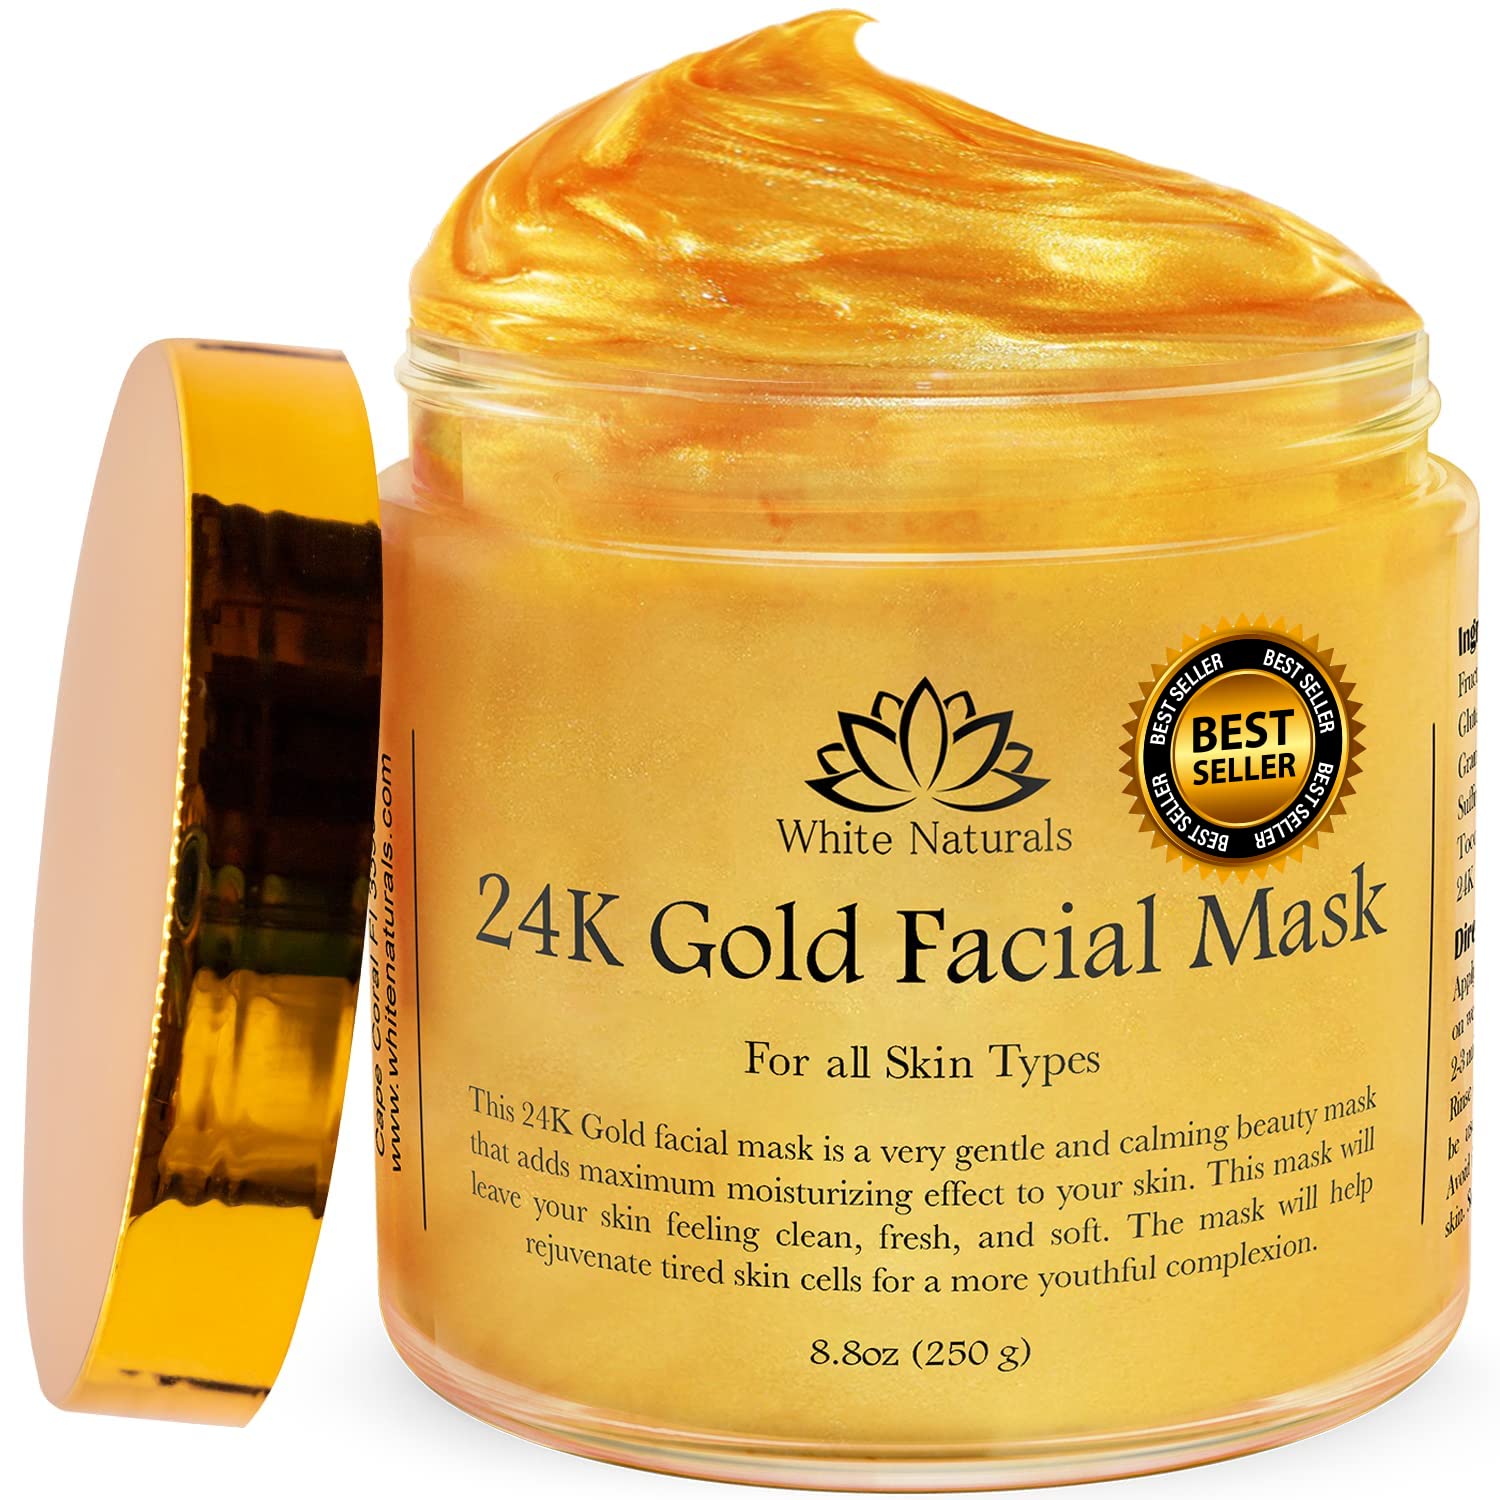 Book Cover White Naturals 24K Gold Facial Mask, Anti-Aging Gold Face Mask For Flawless & Moisturizes Skin, Helps Reduces Wrinkles, Fine Lines & Acne Scars, Removes Blackheads, Dirt & Oils